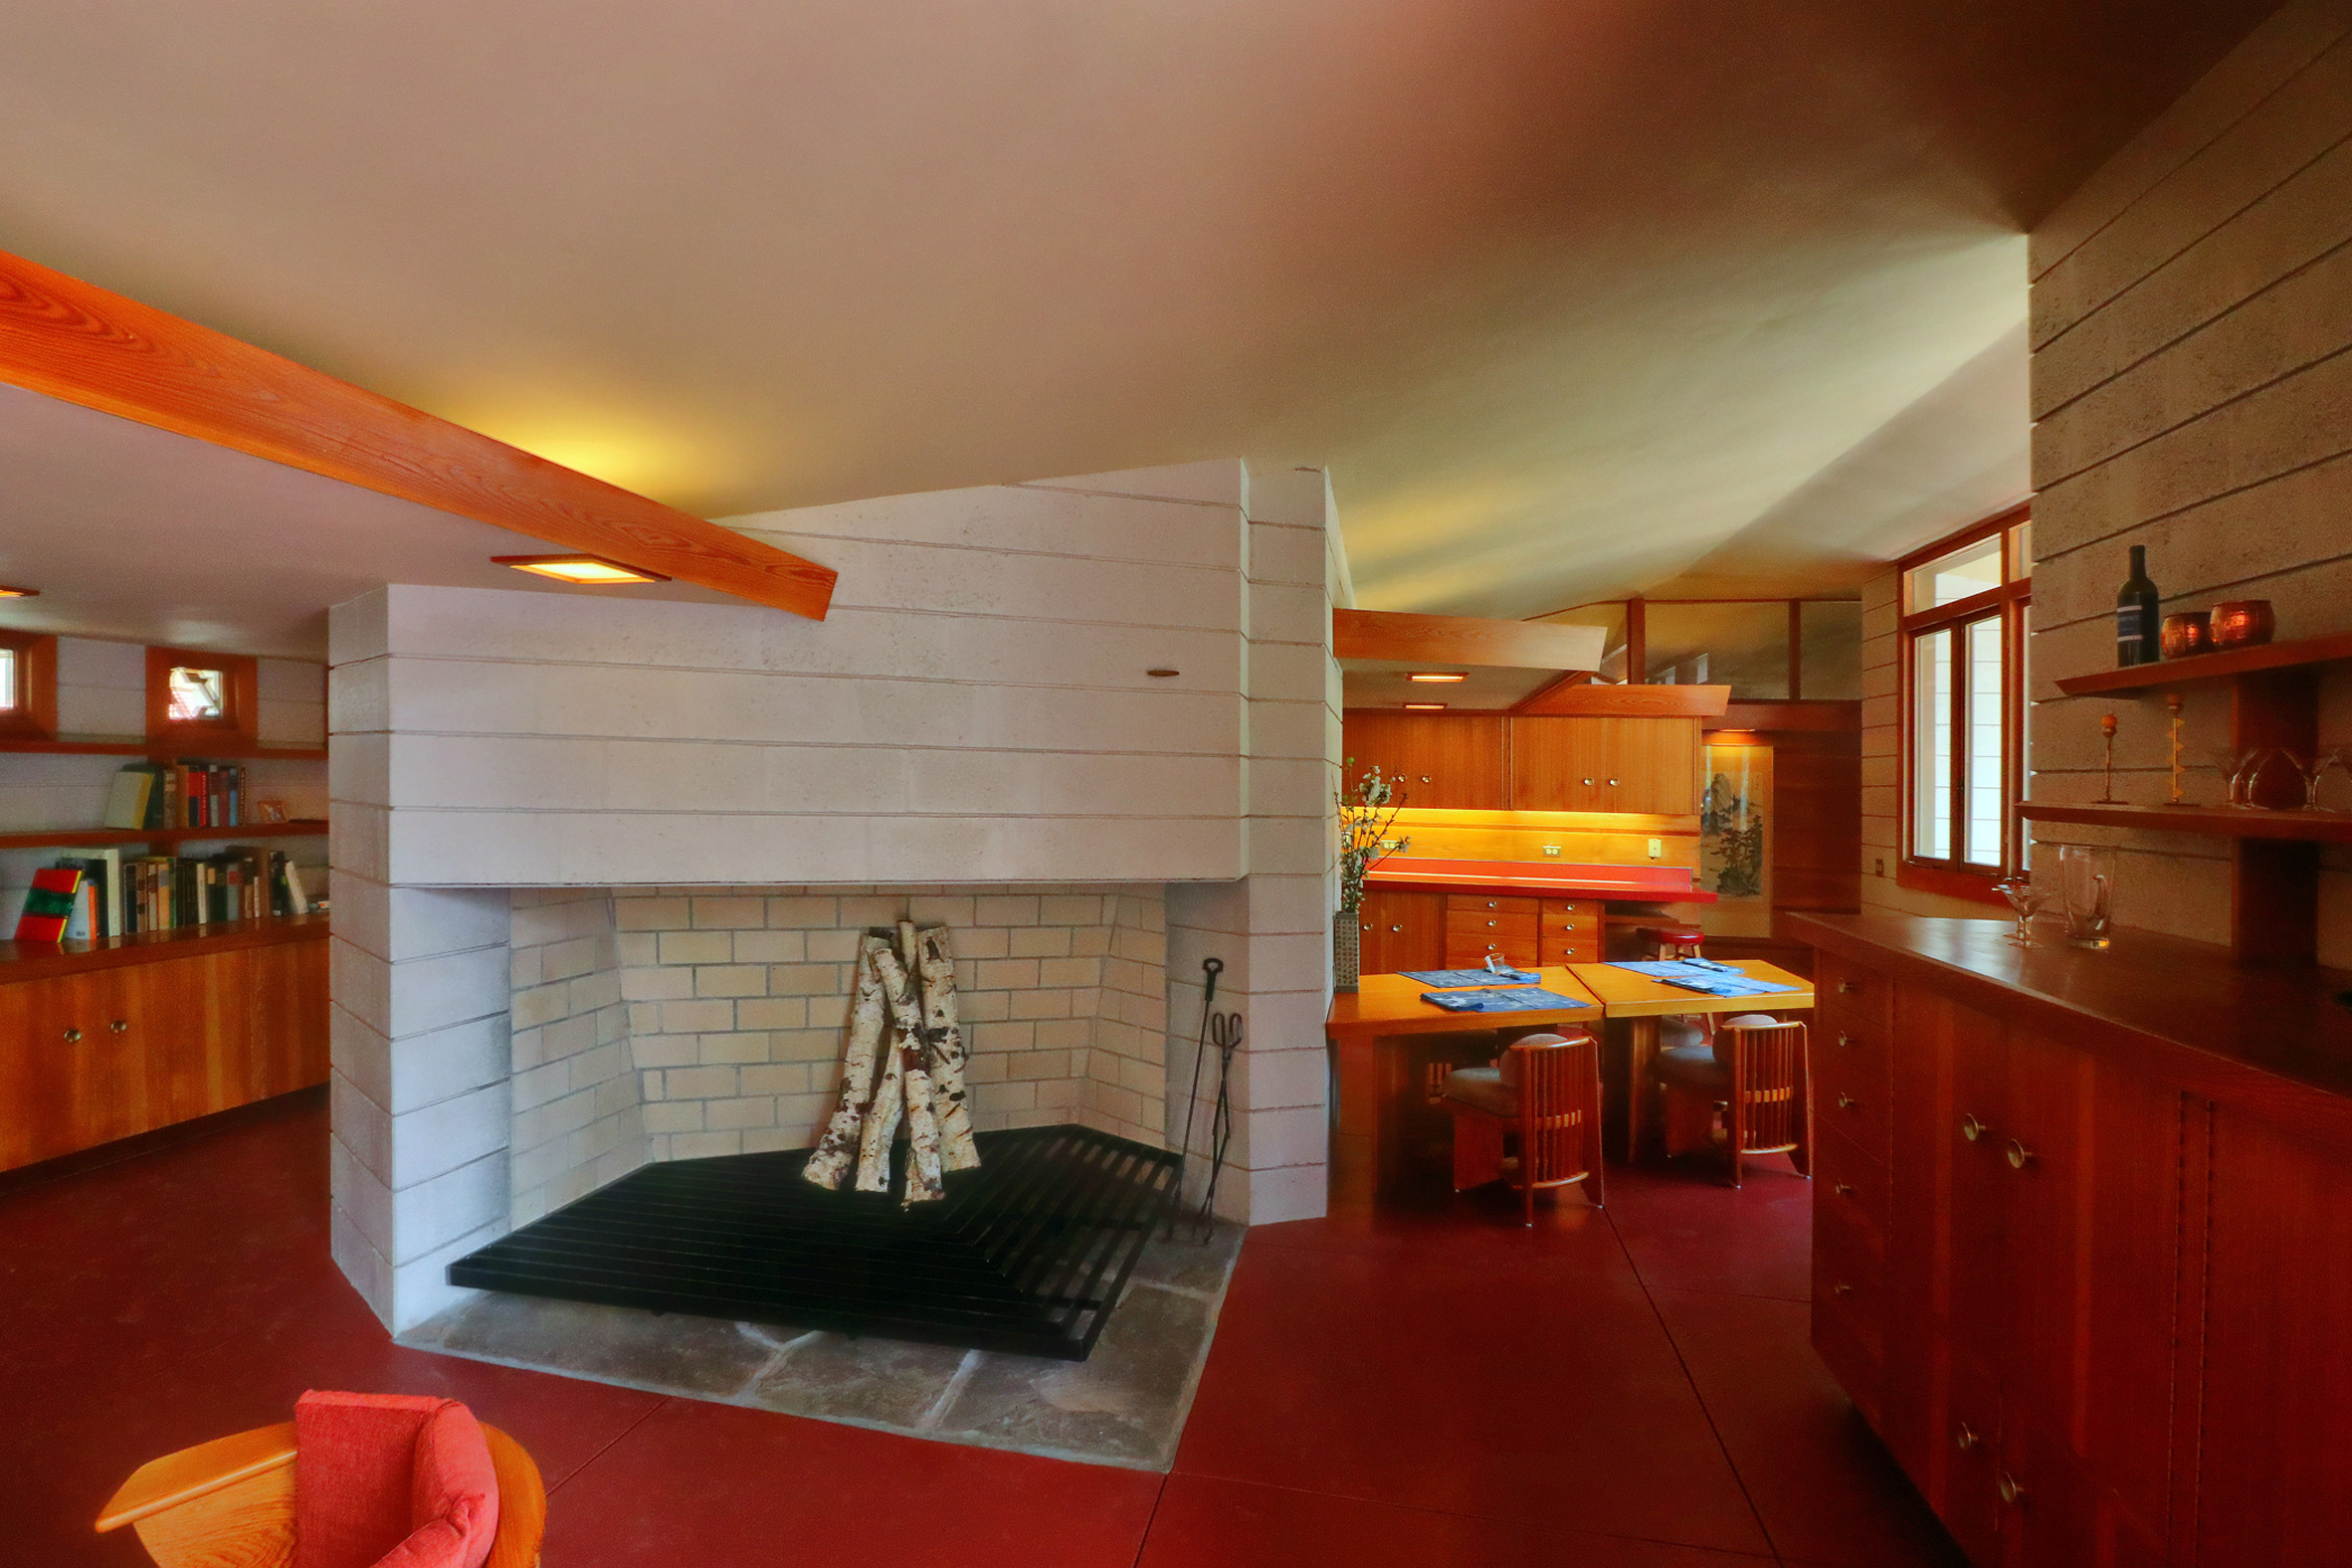 RW Lindholm House by Frank Lloyd Wright moved from Minnesota to Pennsylvania